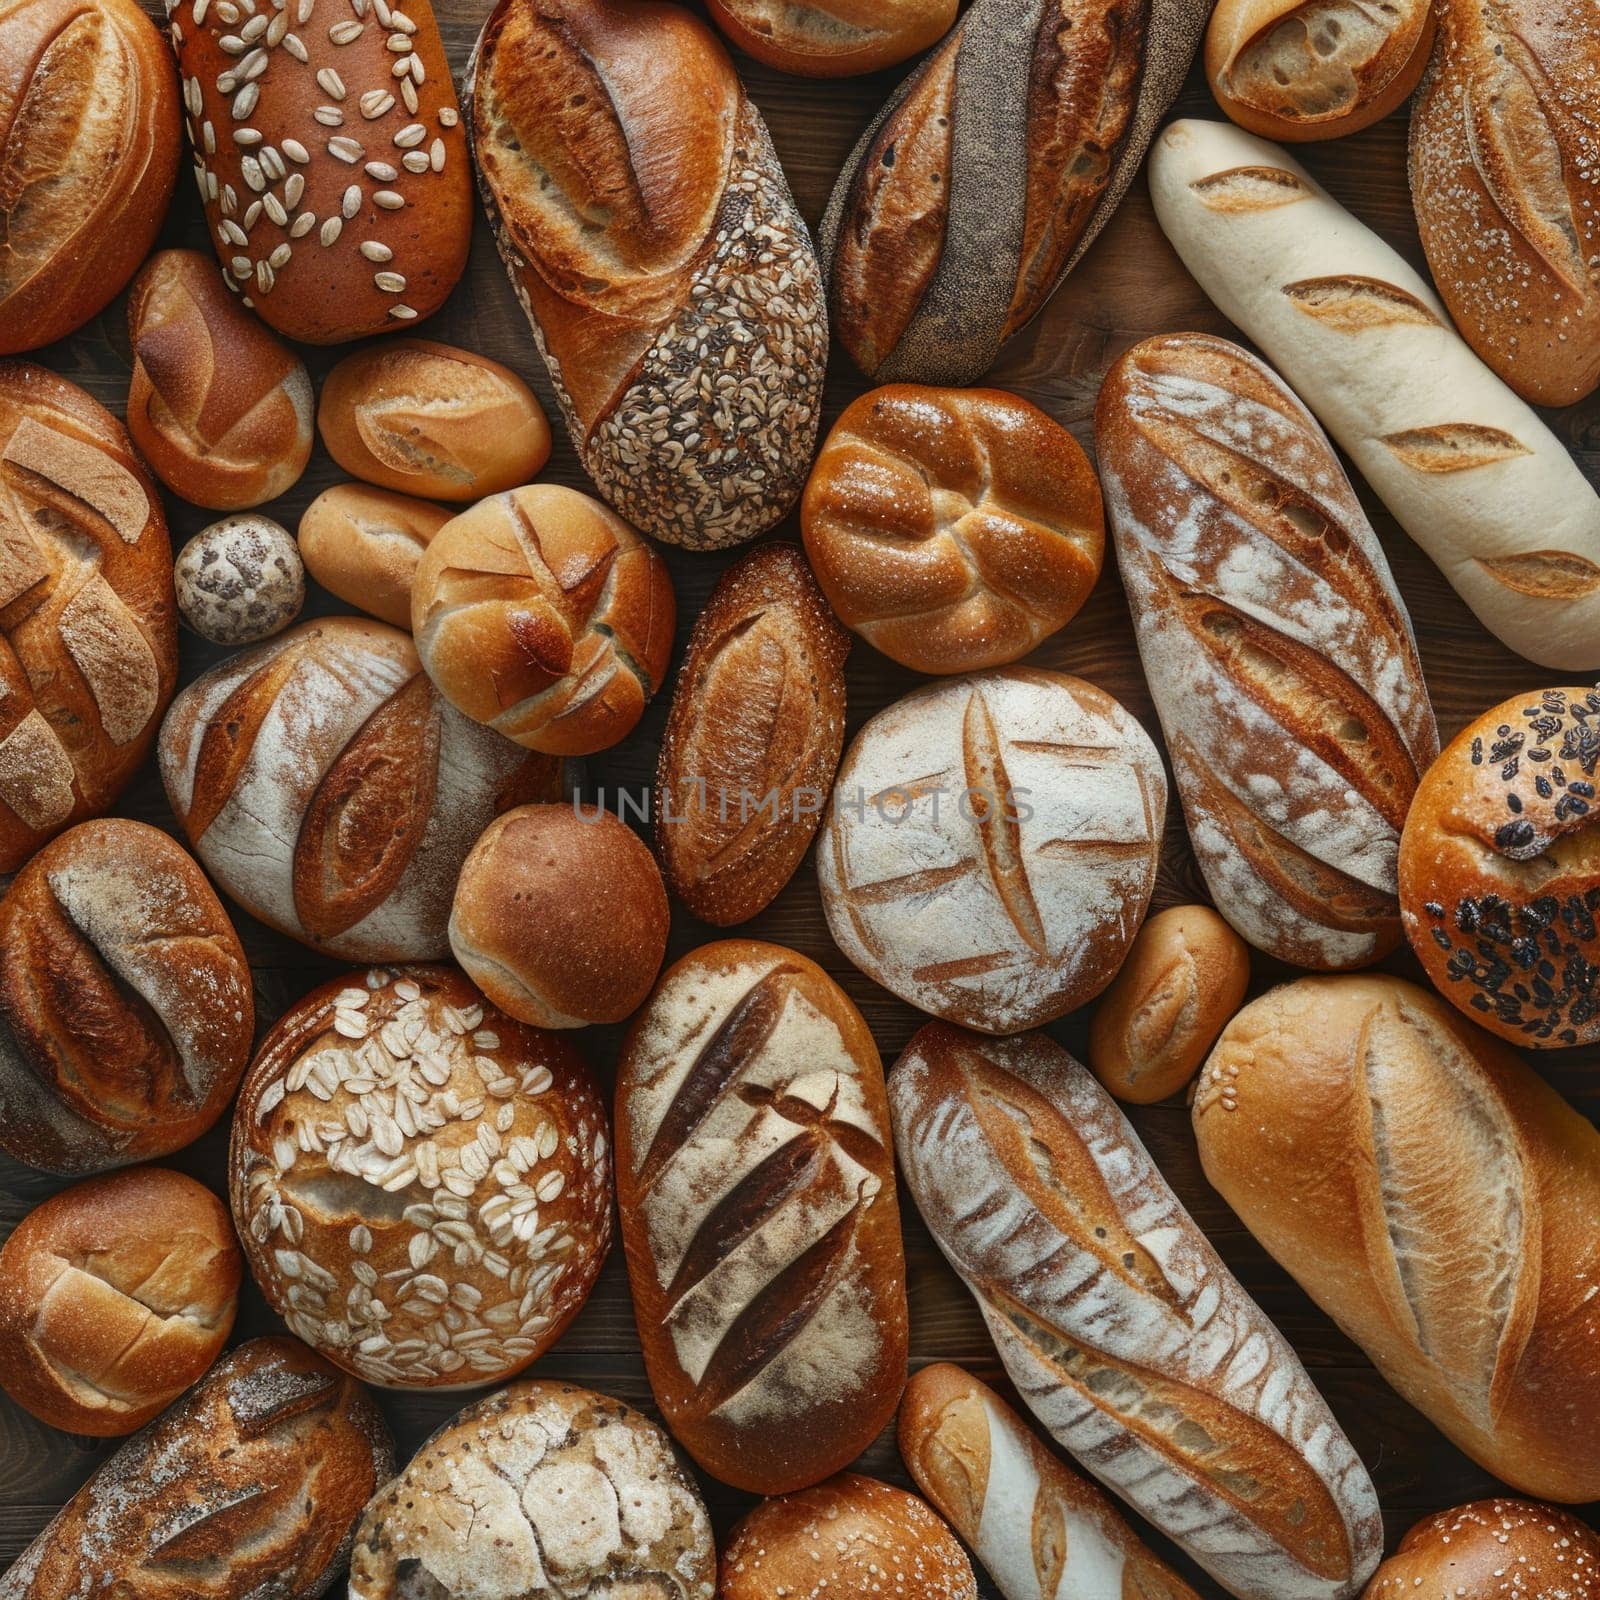 Many mixed breads and rolls shot from above as wallpaper.